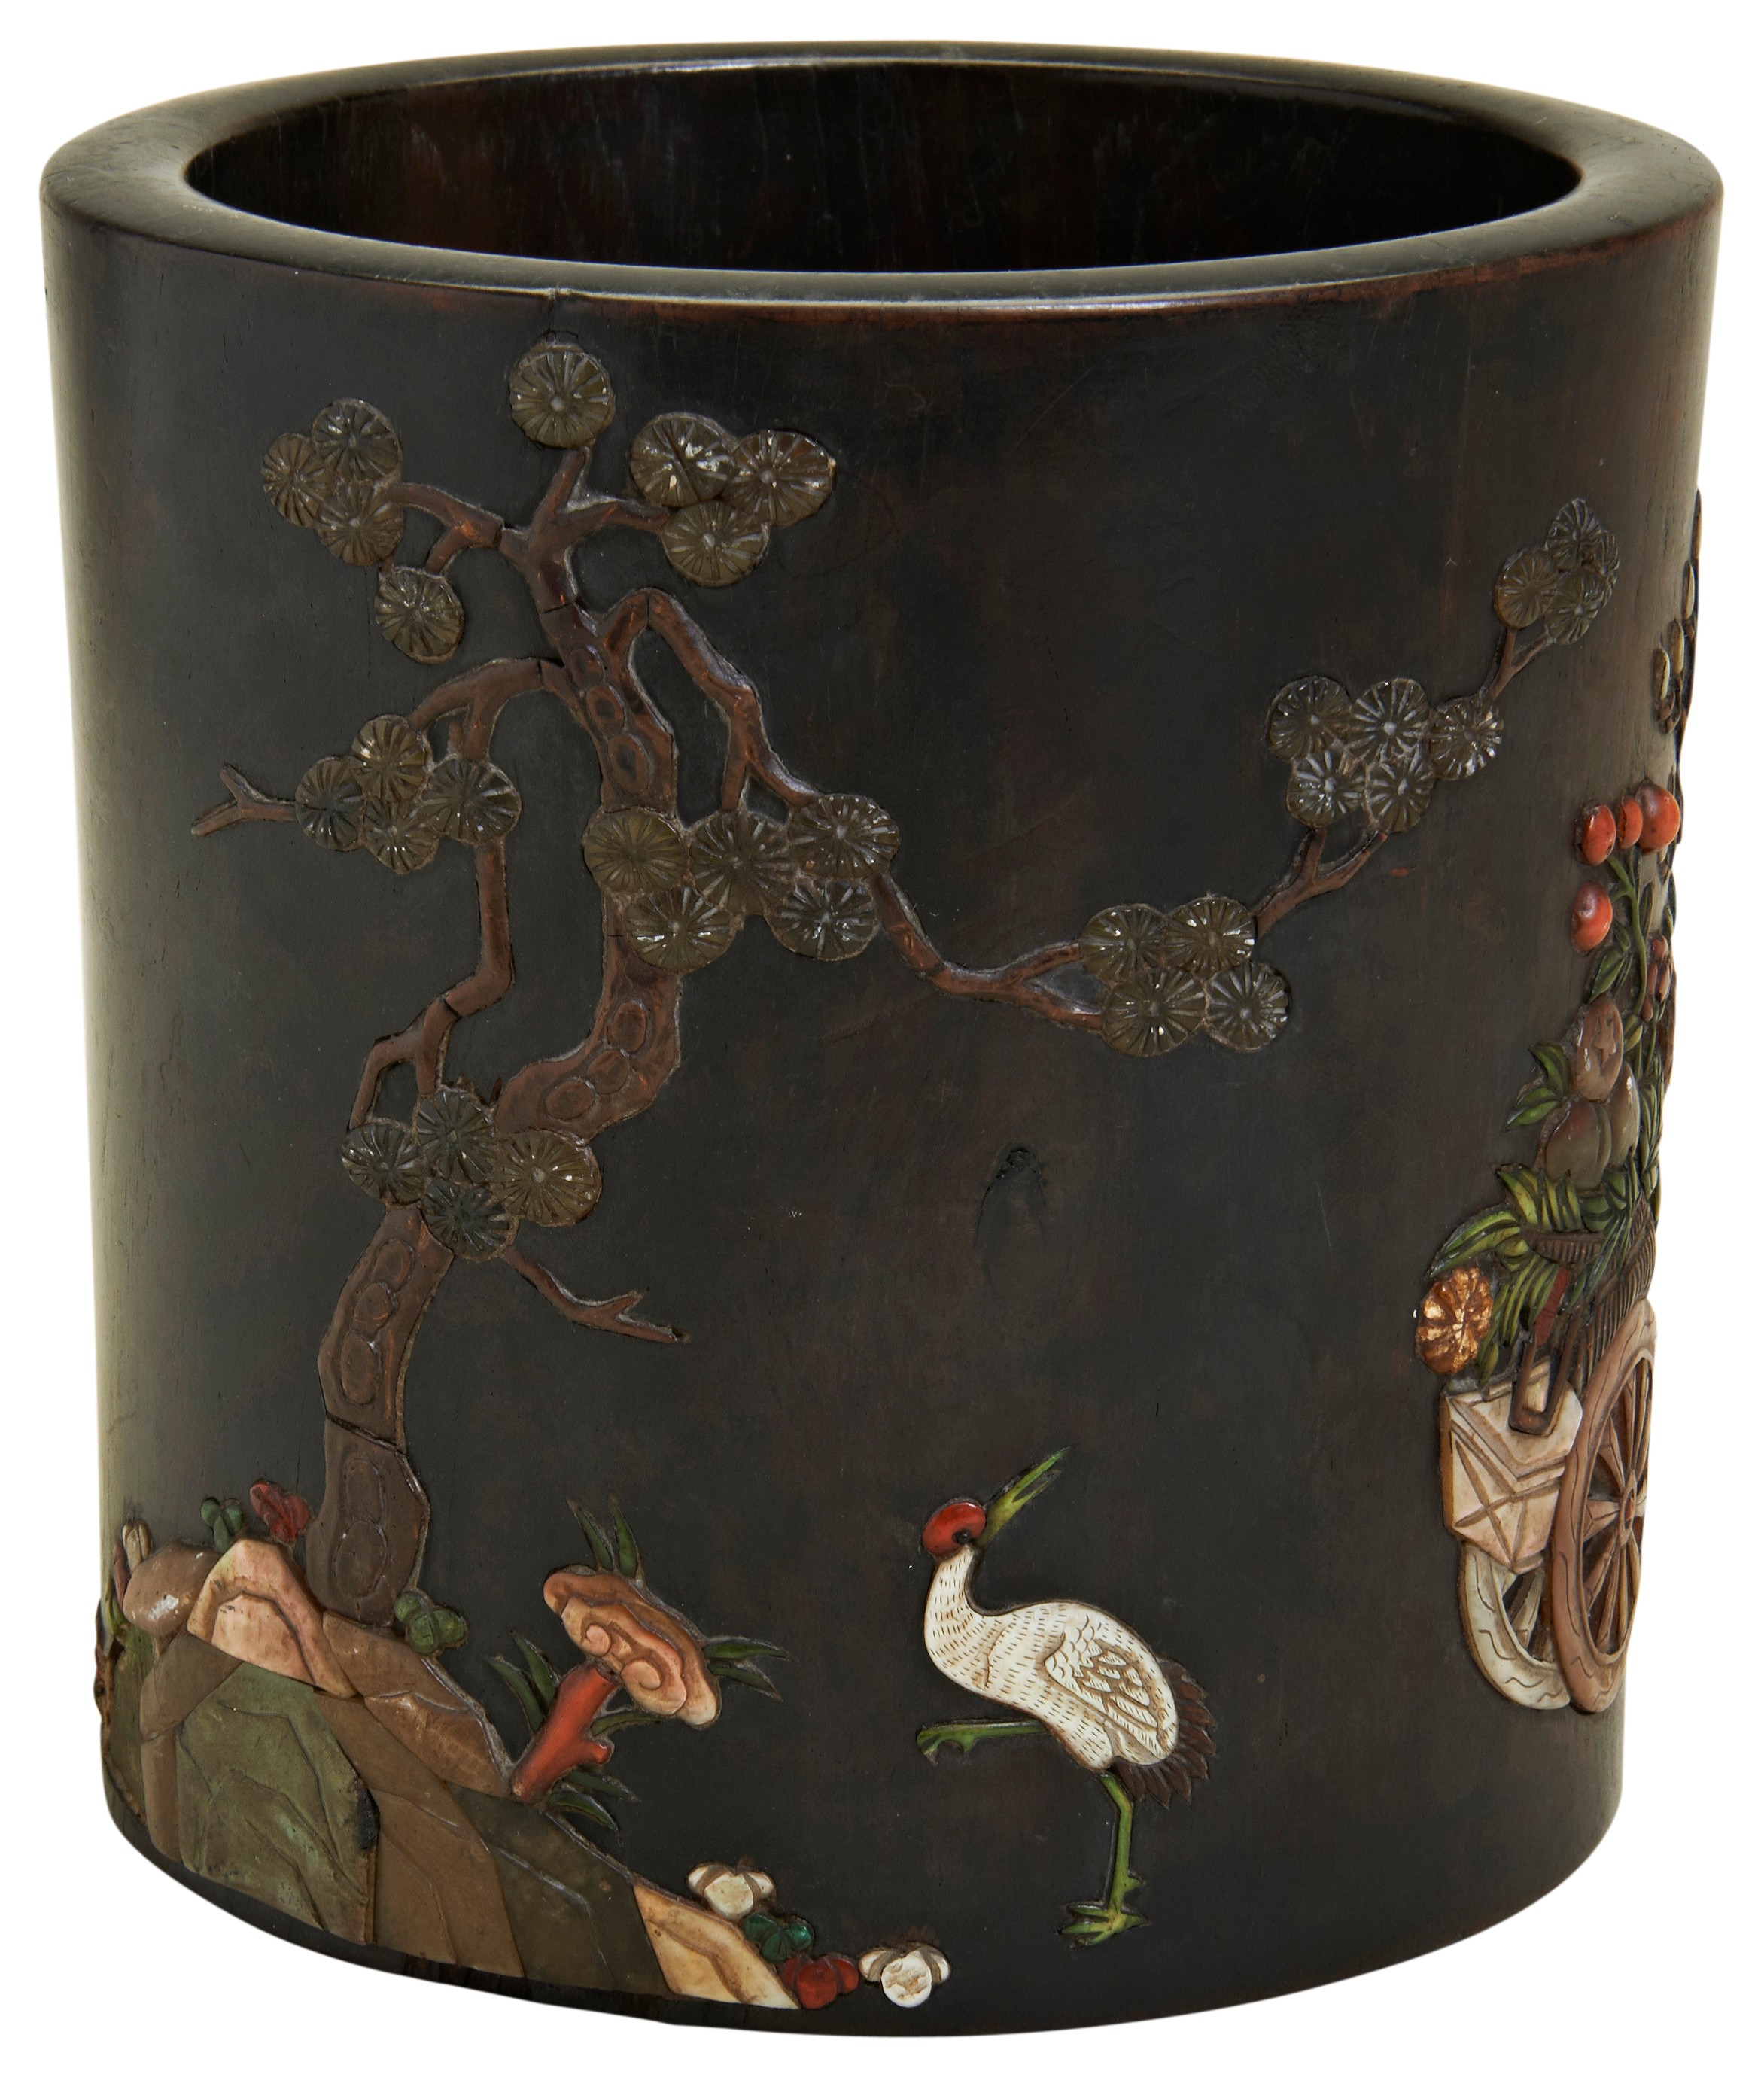 A FINE HARDWOOD AND INLAID BRUSH POT QING DYNASTY, 18TH CENTURY 清 百宝嵌紫檀笔筒 the cylindrical sides - Image 2 of 2